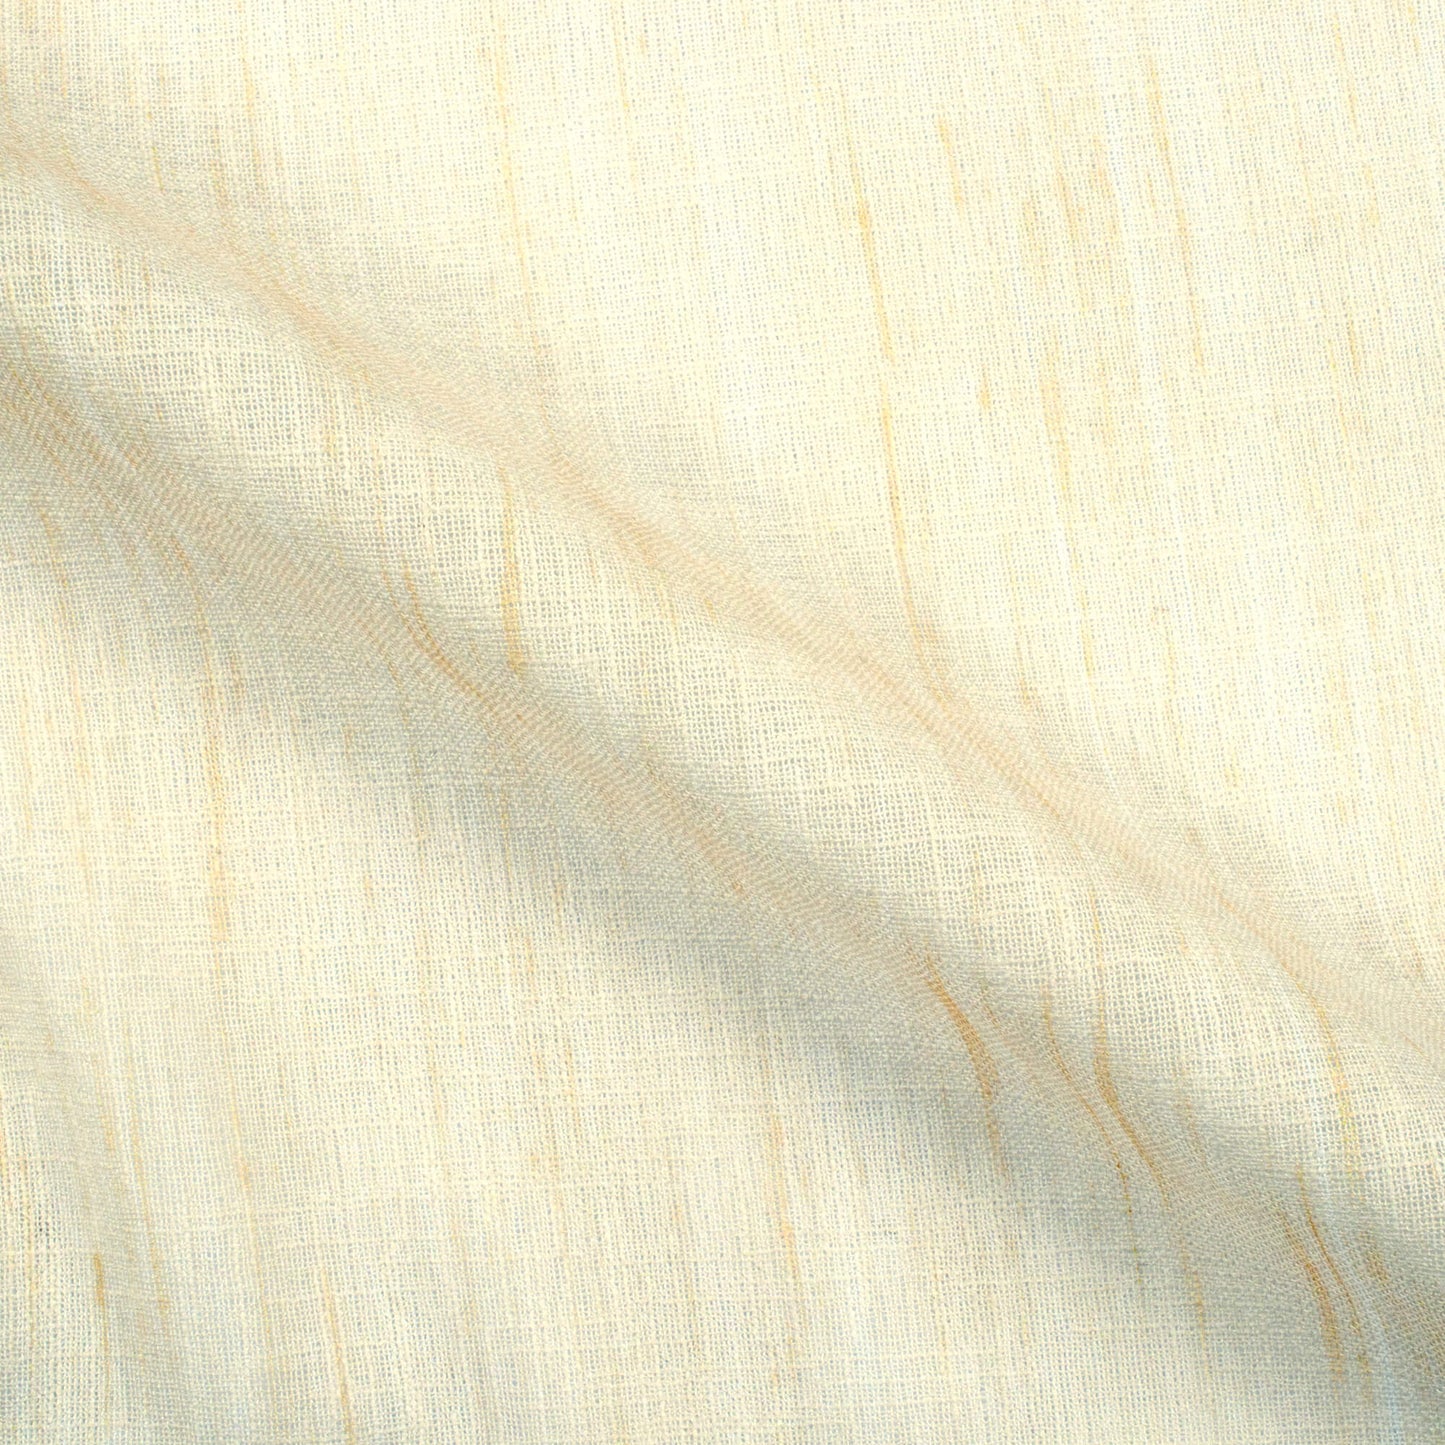 Off White Textured Premium Sheer Fabric (Width 54 Inches)